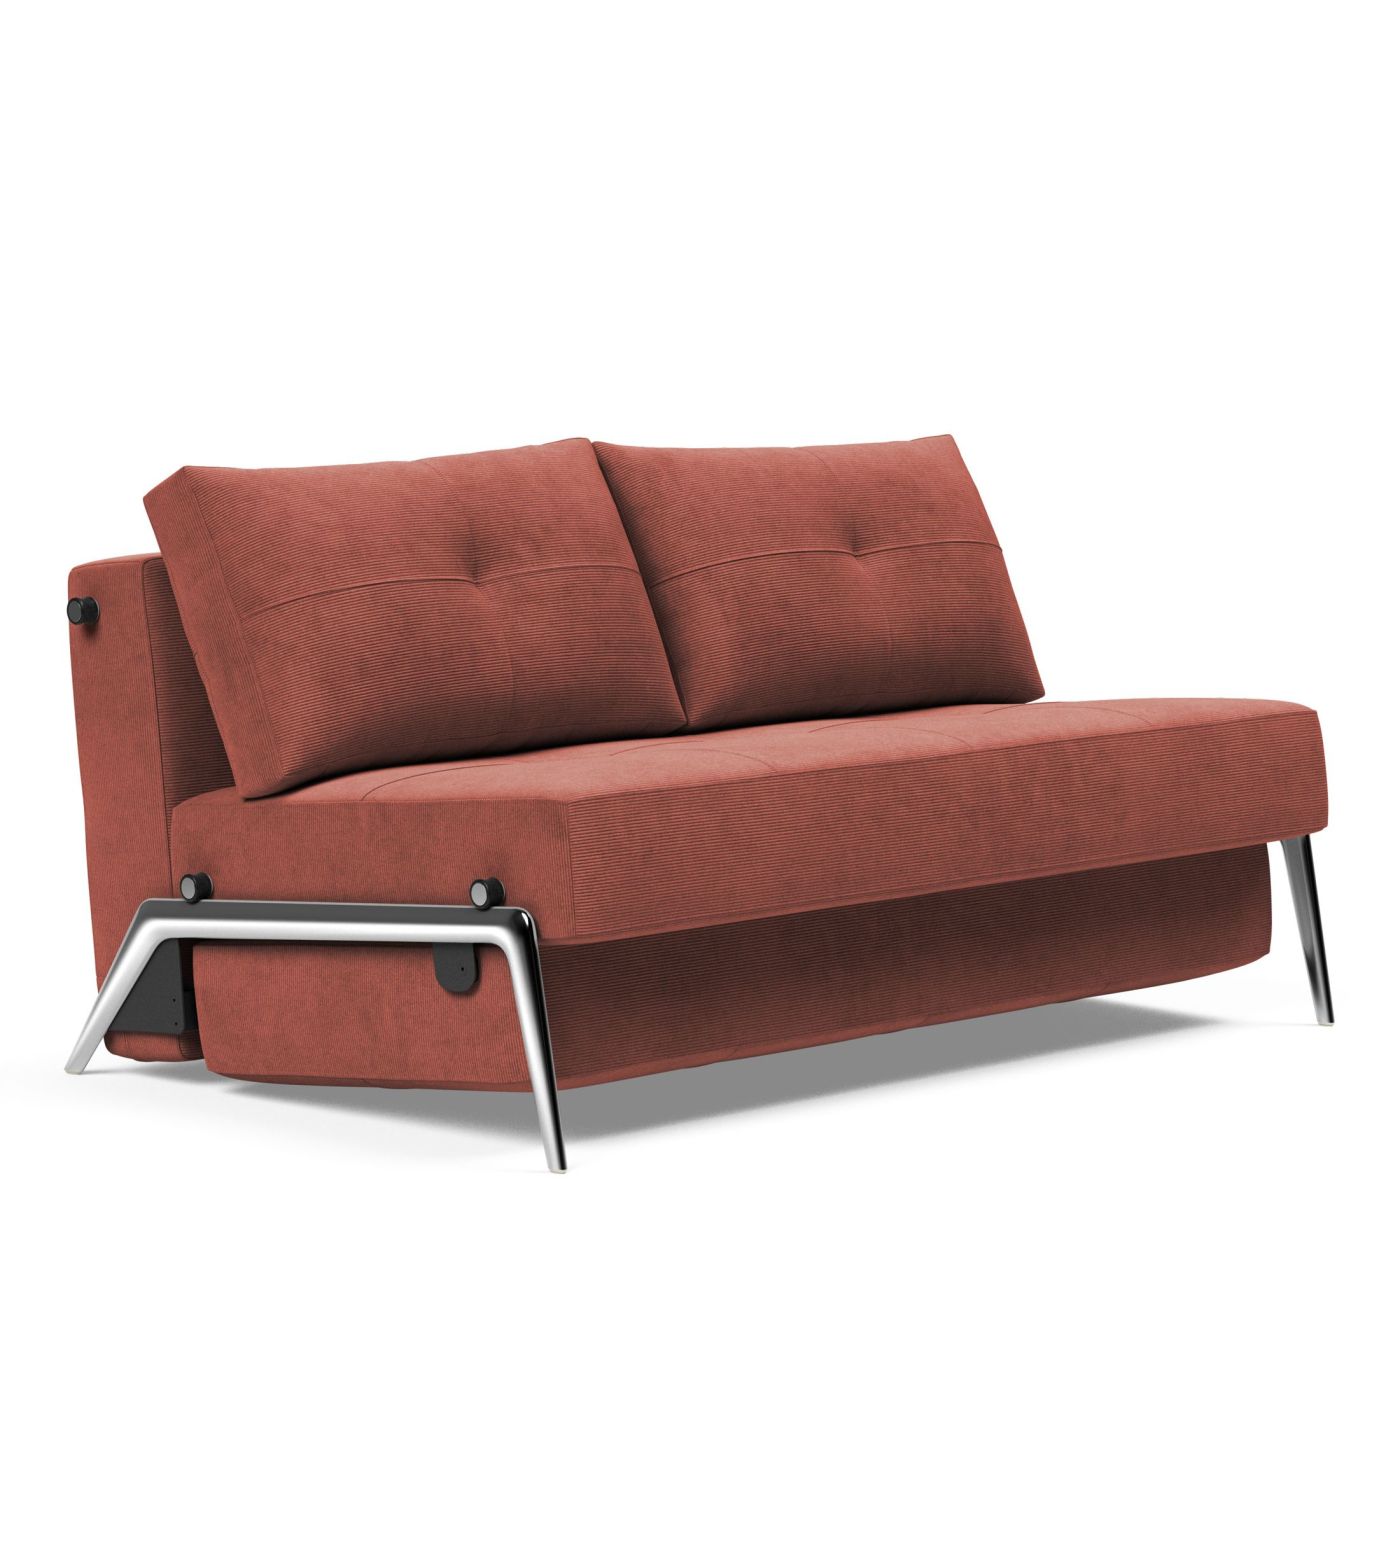 Cubed 02 Queen Size Sofa Bed with Legs by Innovation Living | Modern Sofa Beds | Cressina